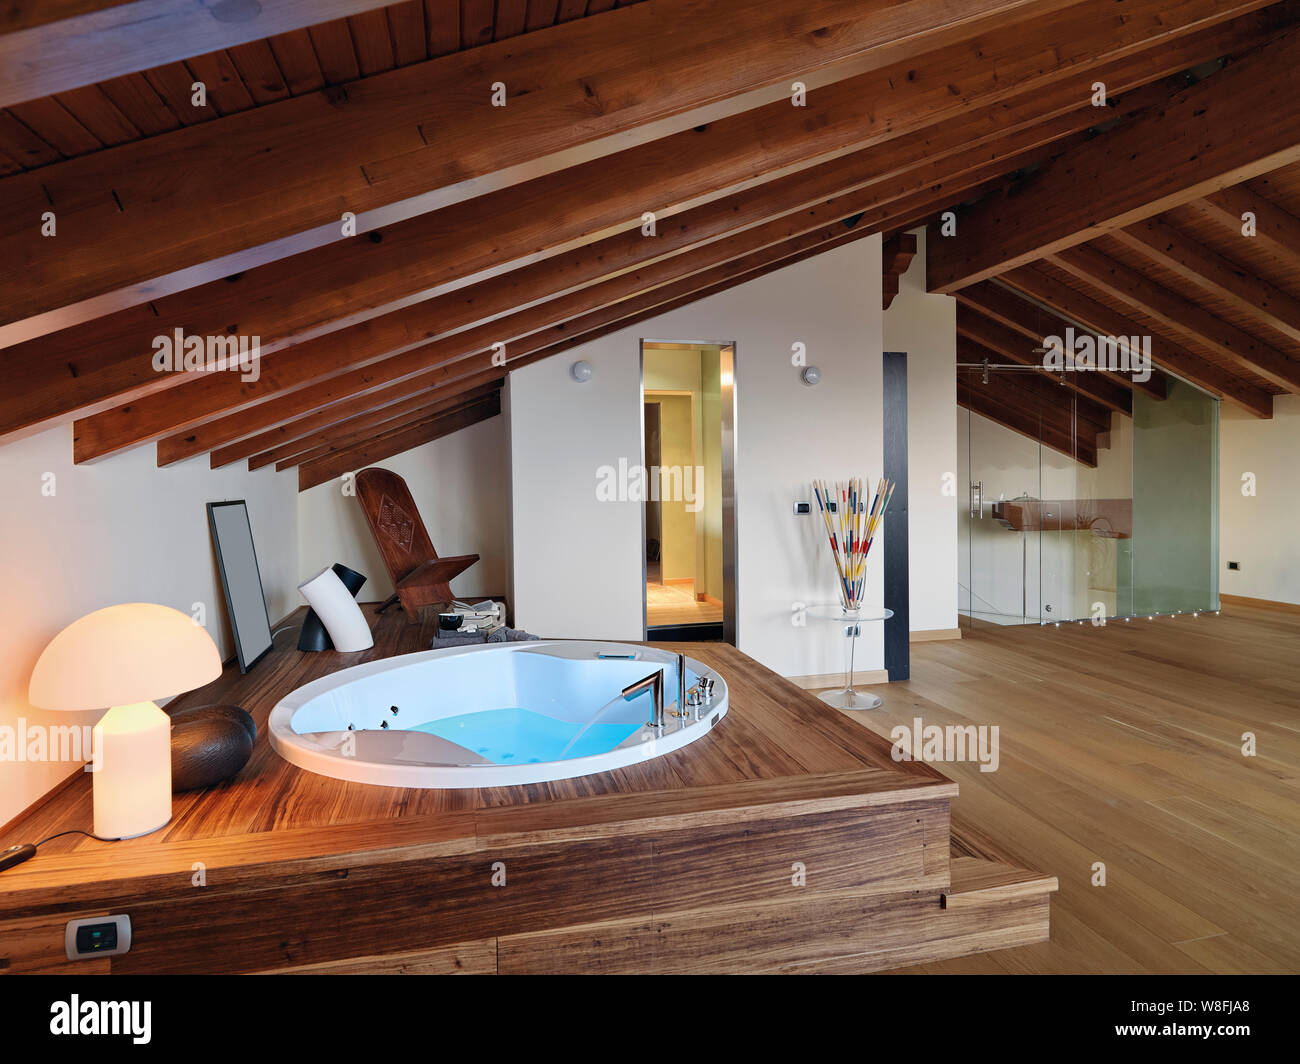 interiors shots of a modern bathroom in the attic room in the foreground the whirlpool bathtub the floor and the ceiling are made of wood Stock Photo